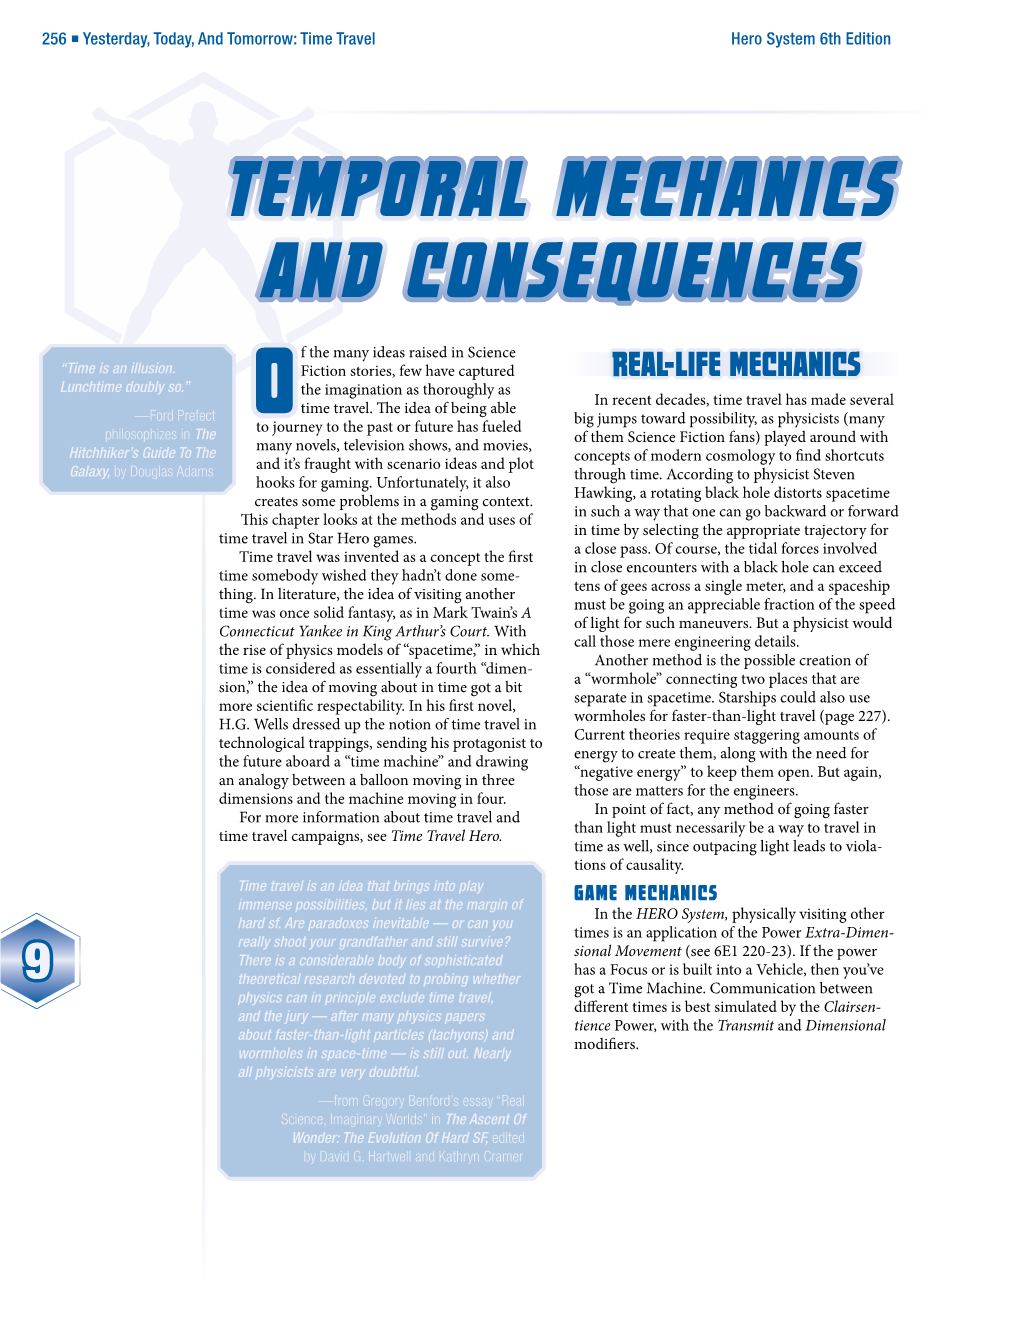 Temporal Mechanics and Consequences